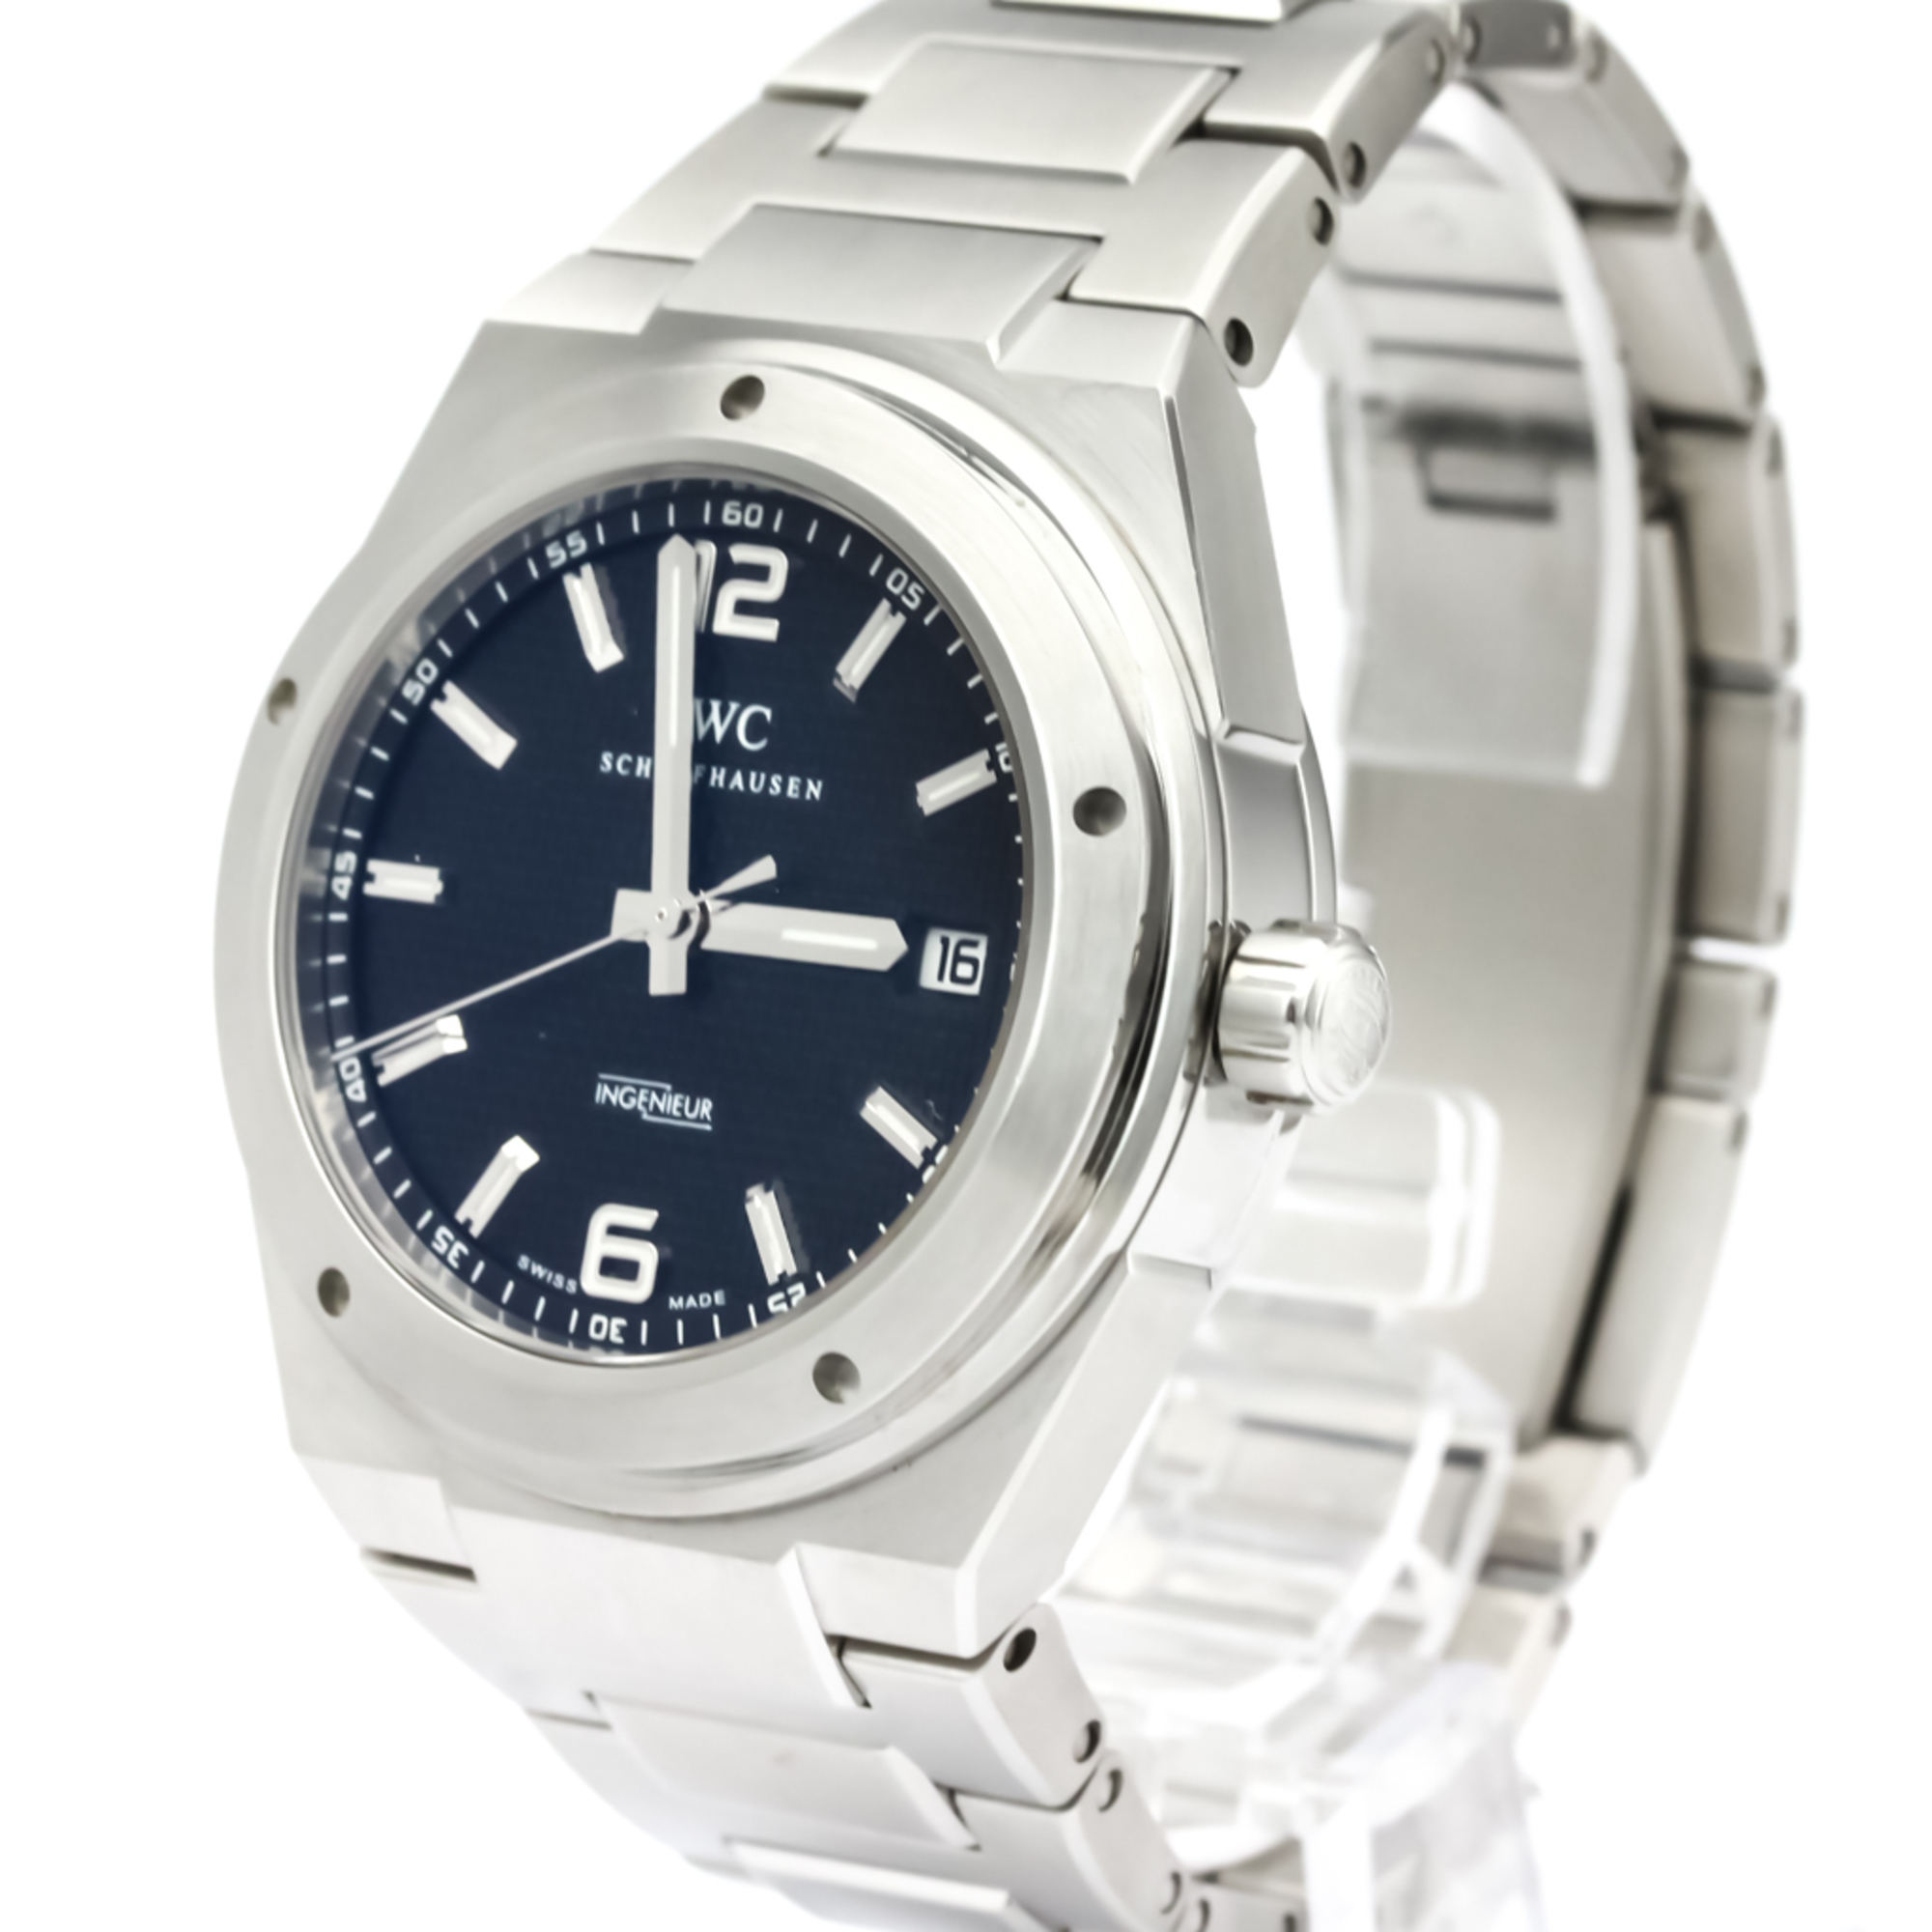 IWC Ingenieur Stainless Steel Automatic Mens Watch IW322701